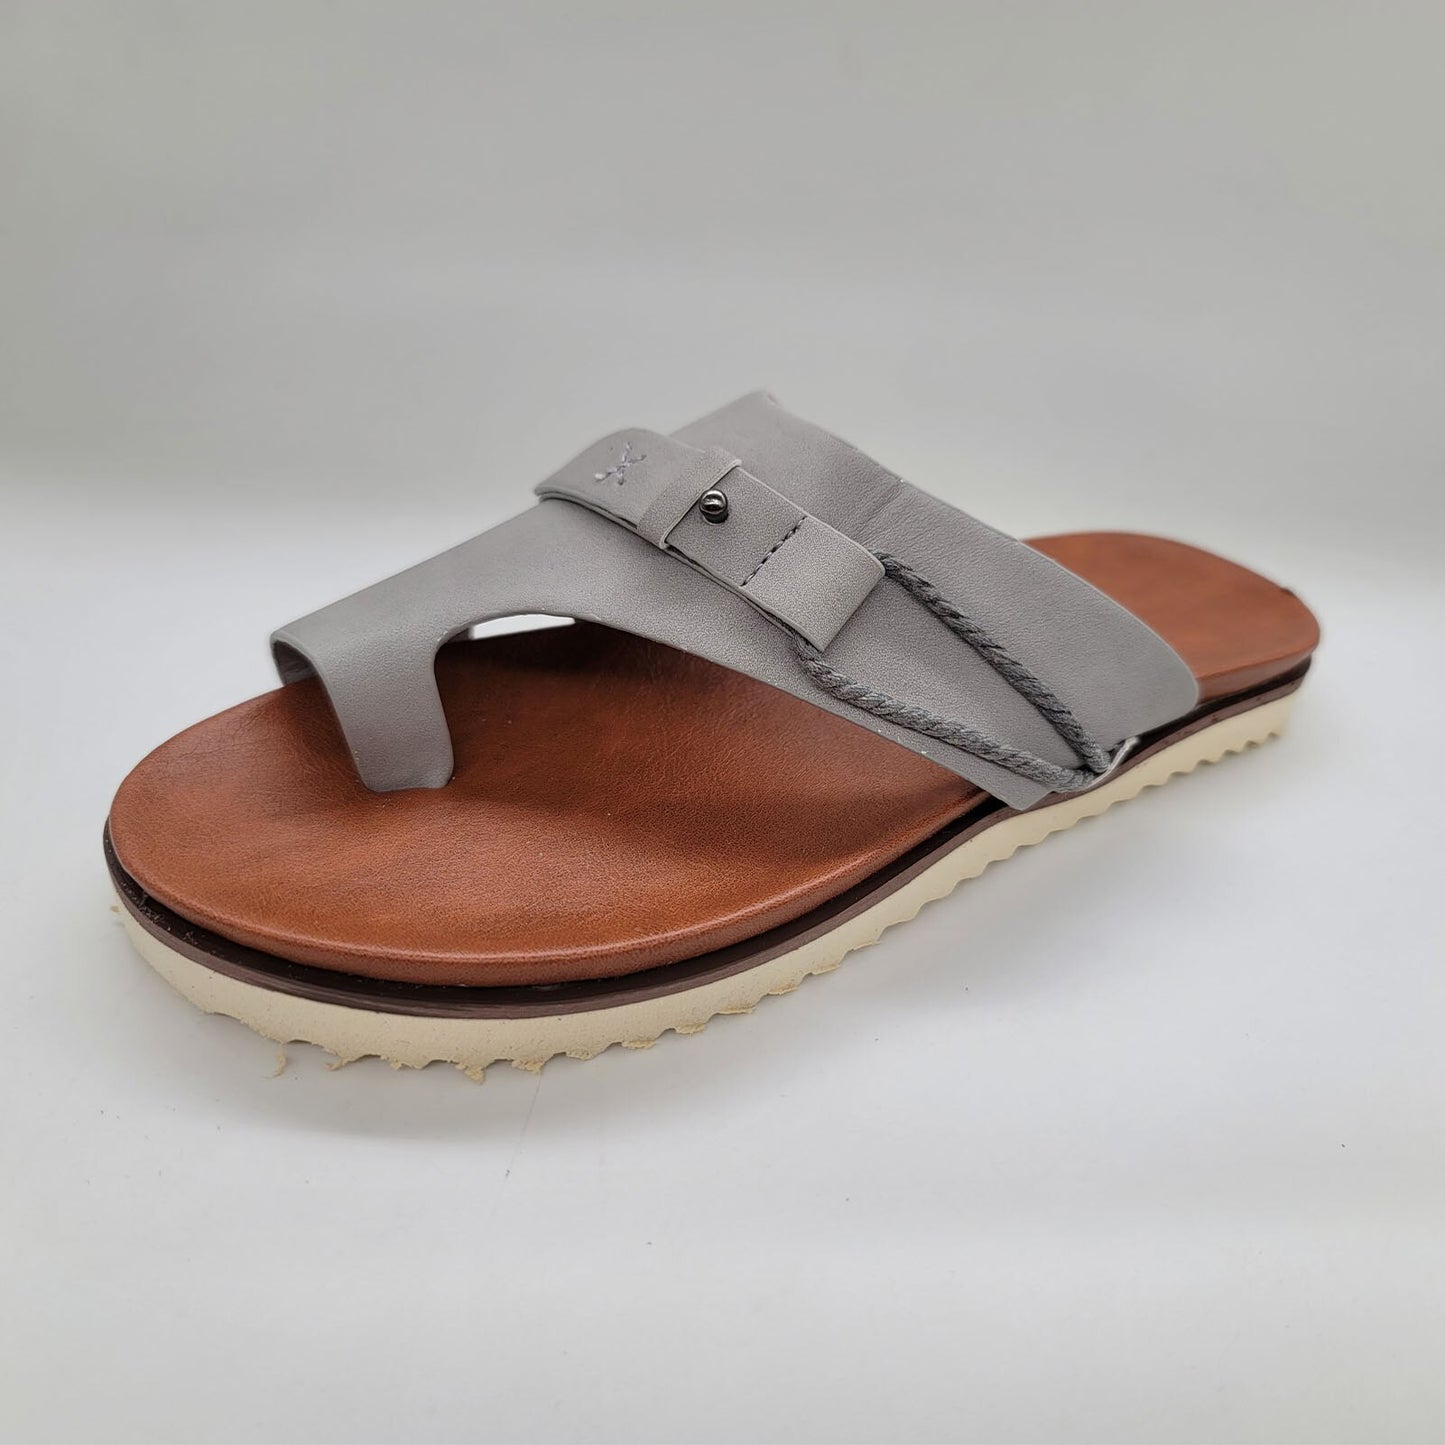 Orthopedic Sandals™ Open Toe Sandals For Bunions And Hammertoes